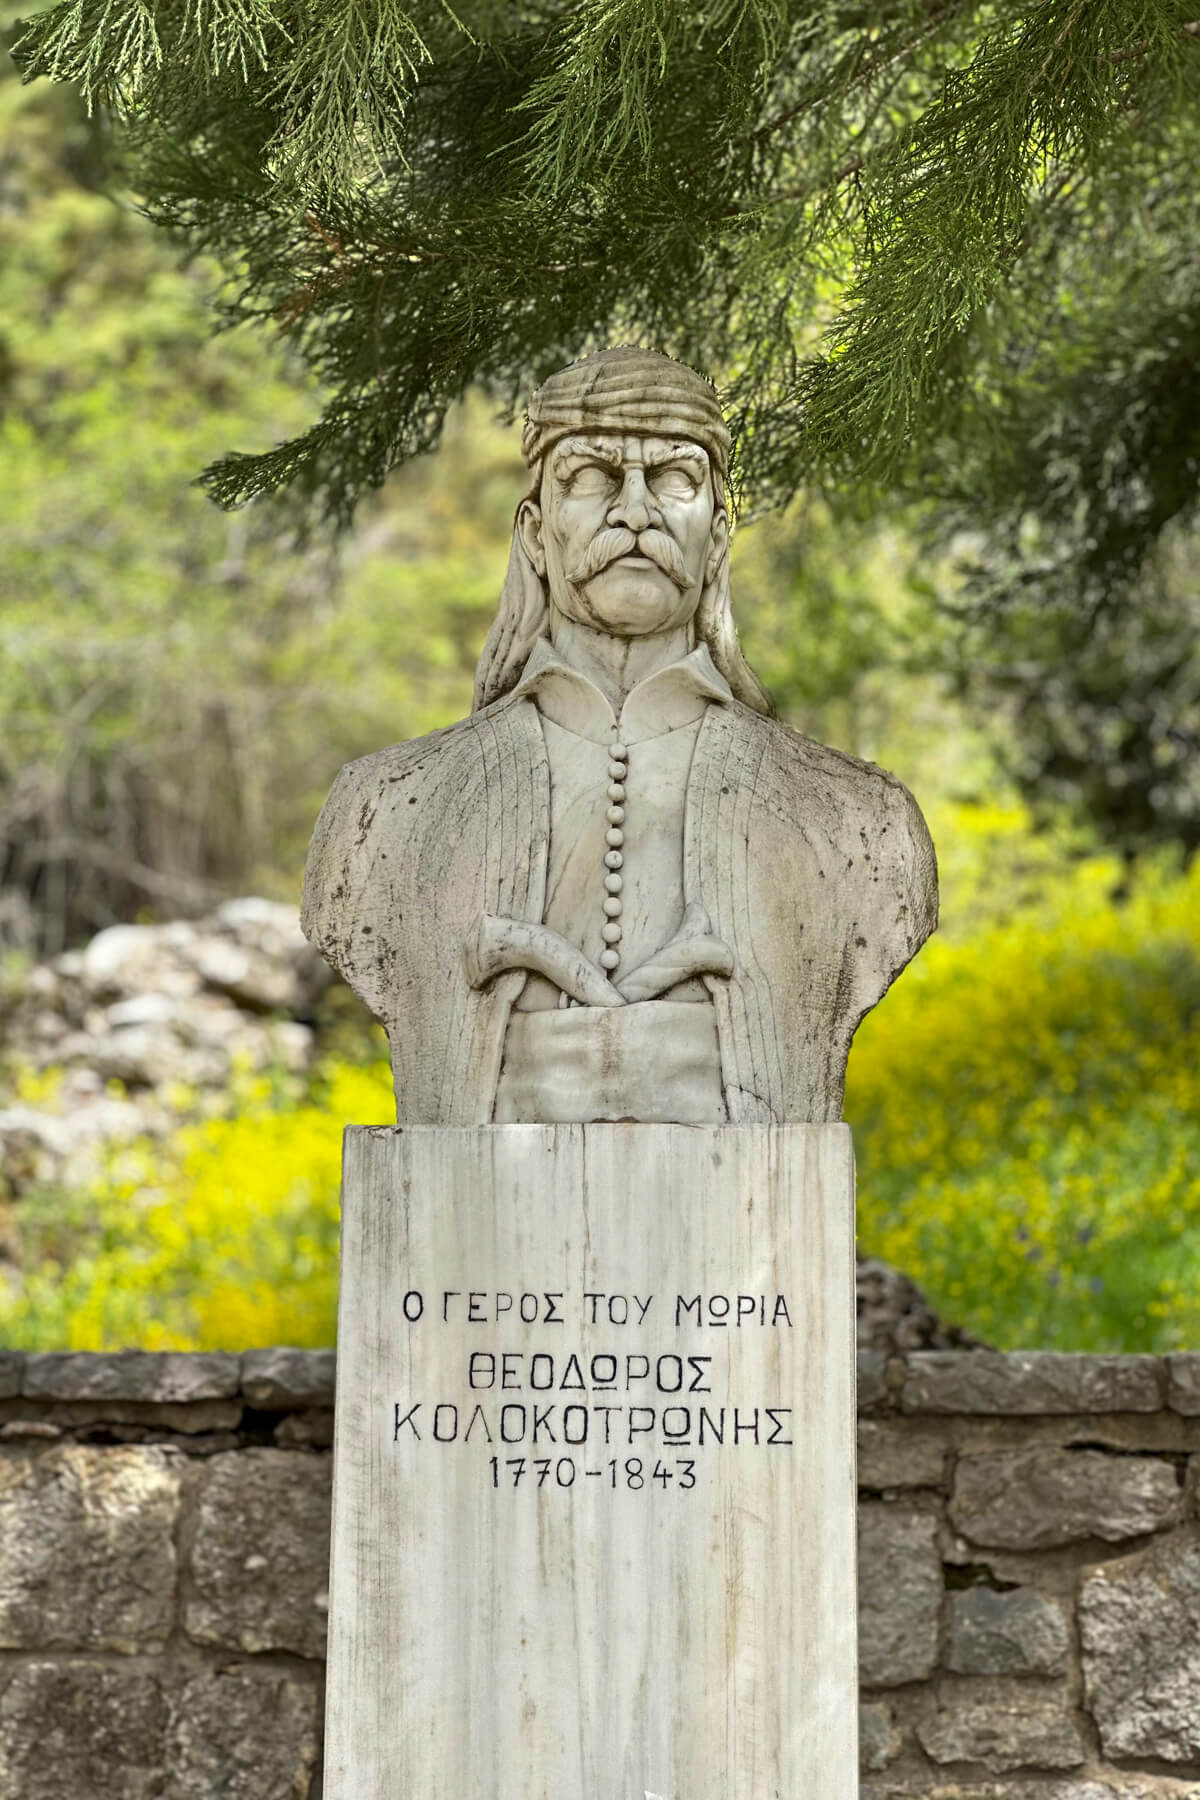 The bust of Kolokotronis